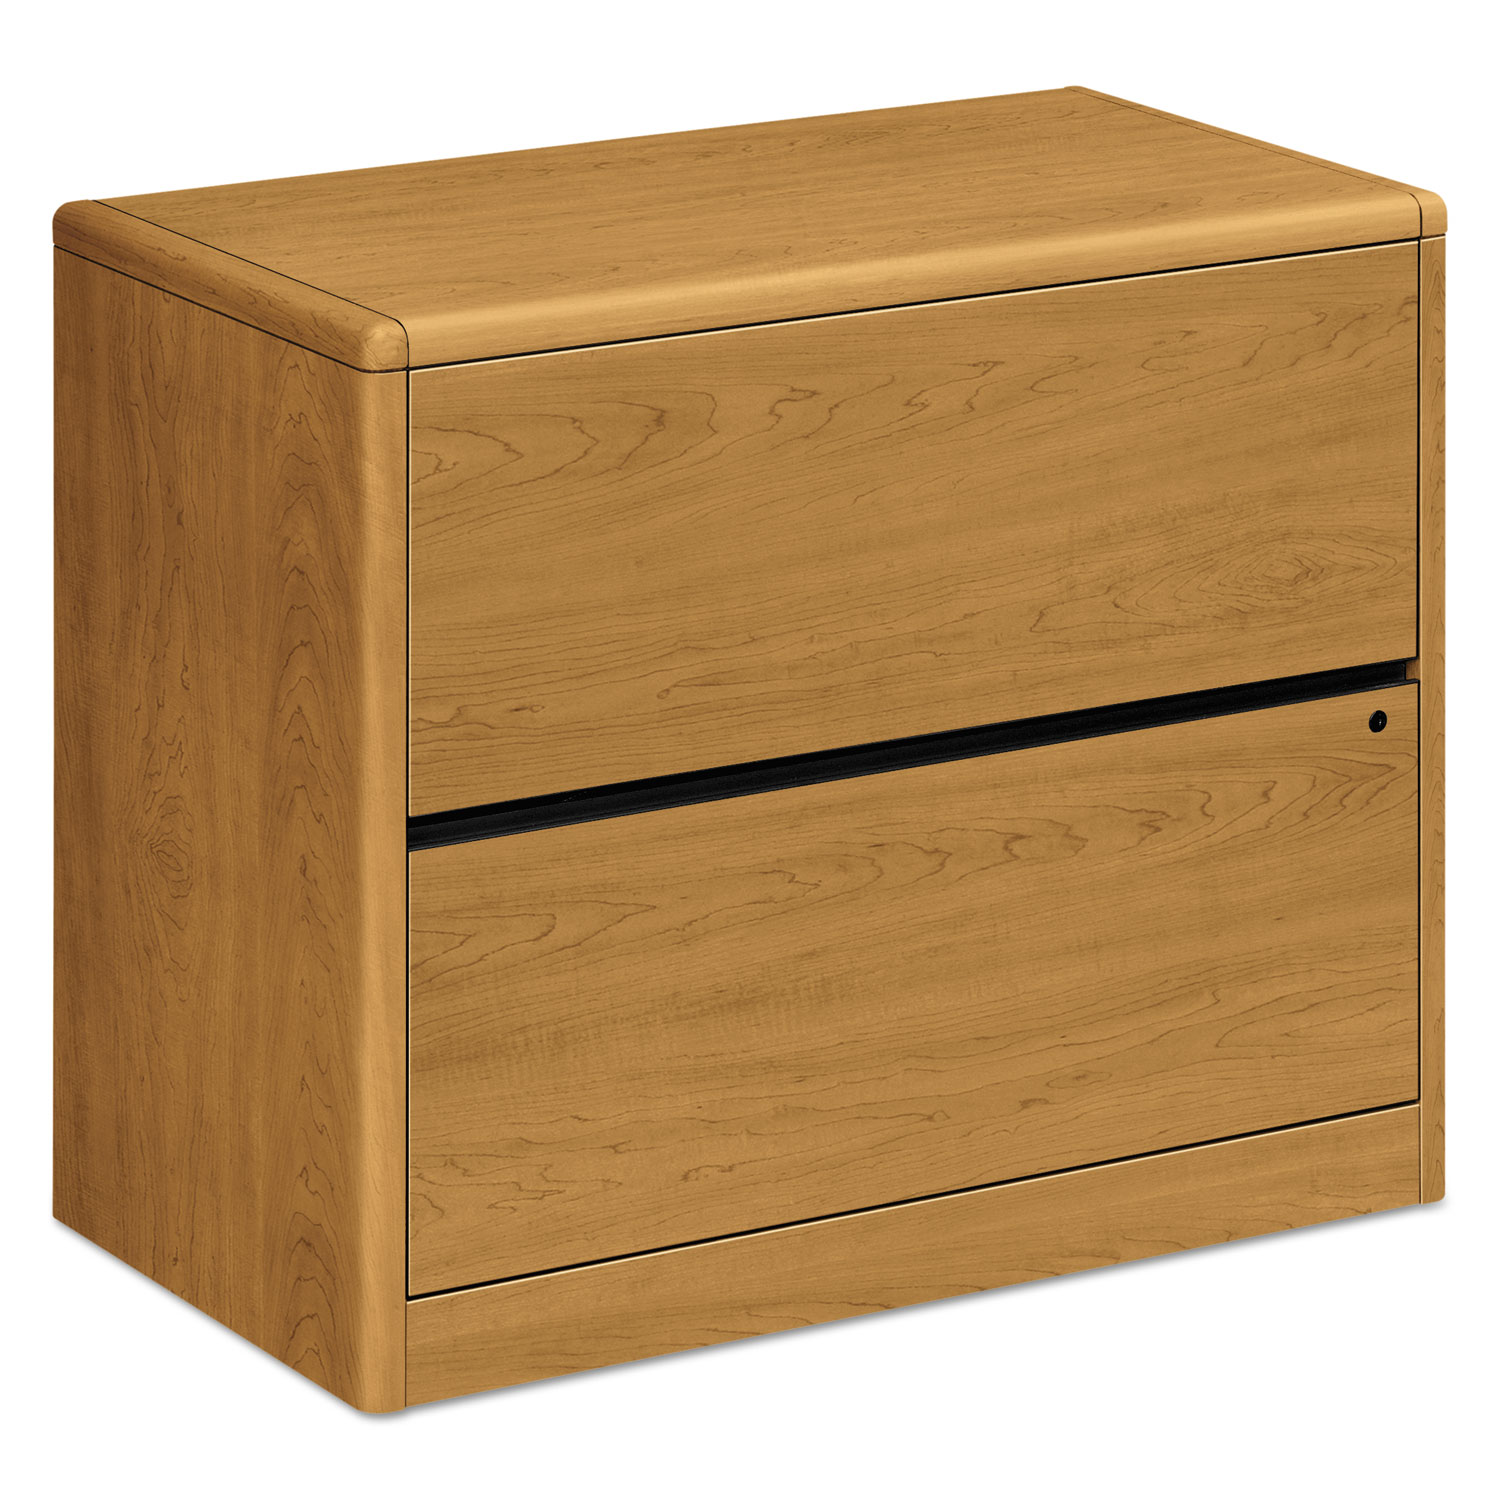 10700 Series Two Drawer Lateral File, 36w x 20d x 29 1/2h, Harvest